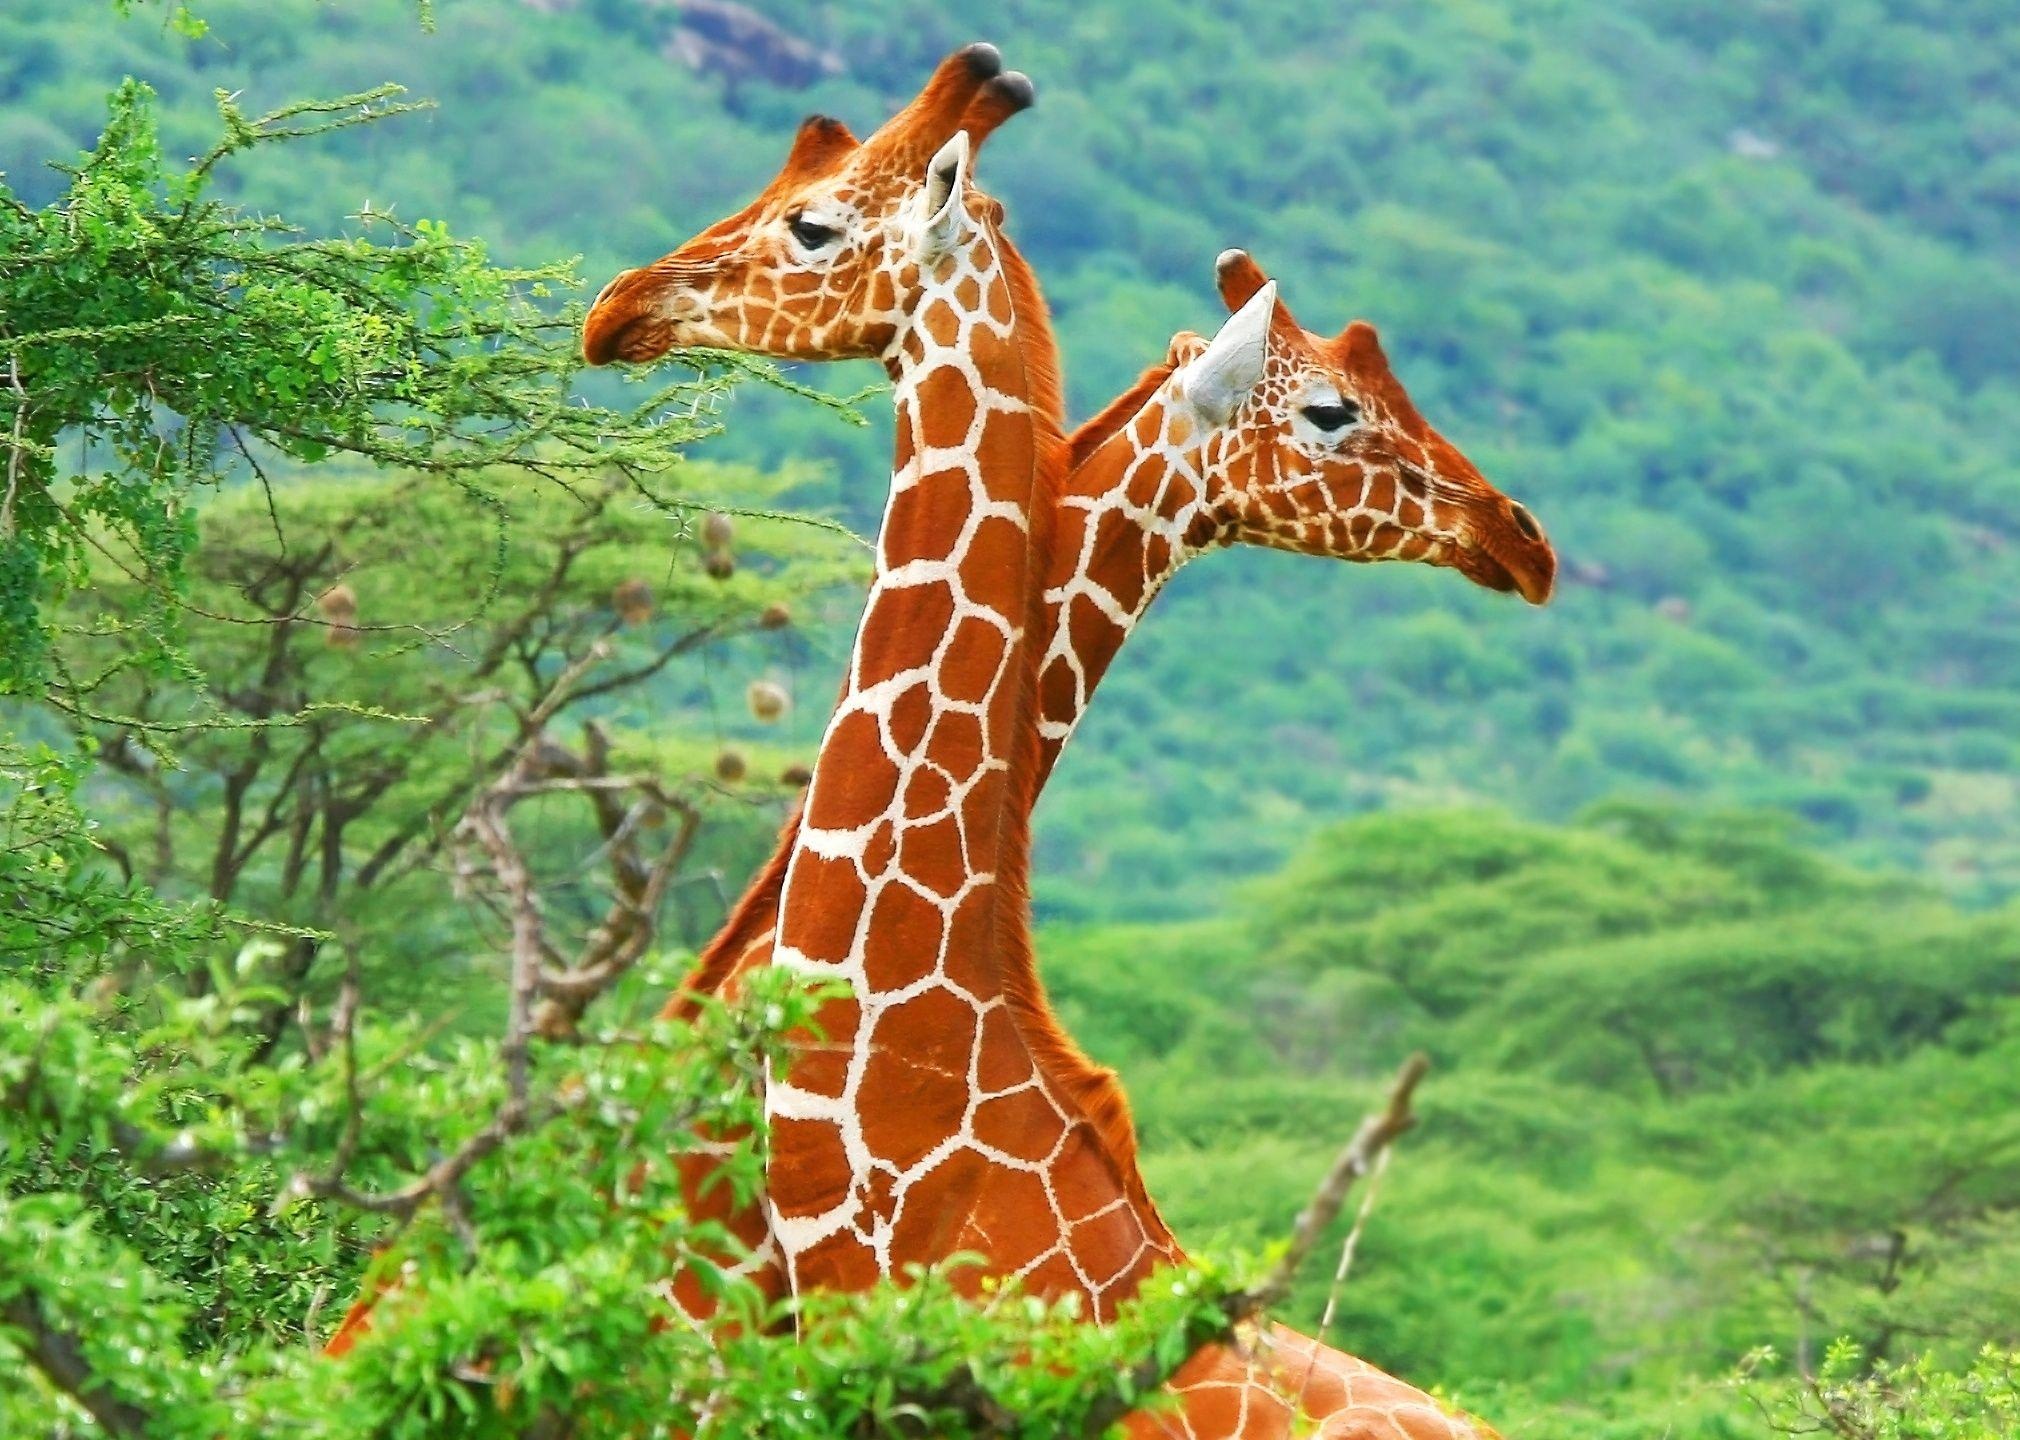 Giraffe: Its neck is the longest on any extant animal at around 2–3 meters in the largest males. 2020x1440 HD Background.